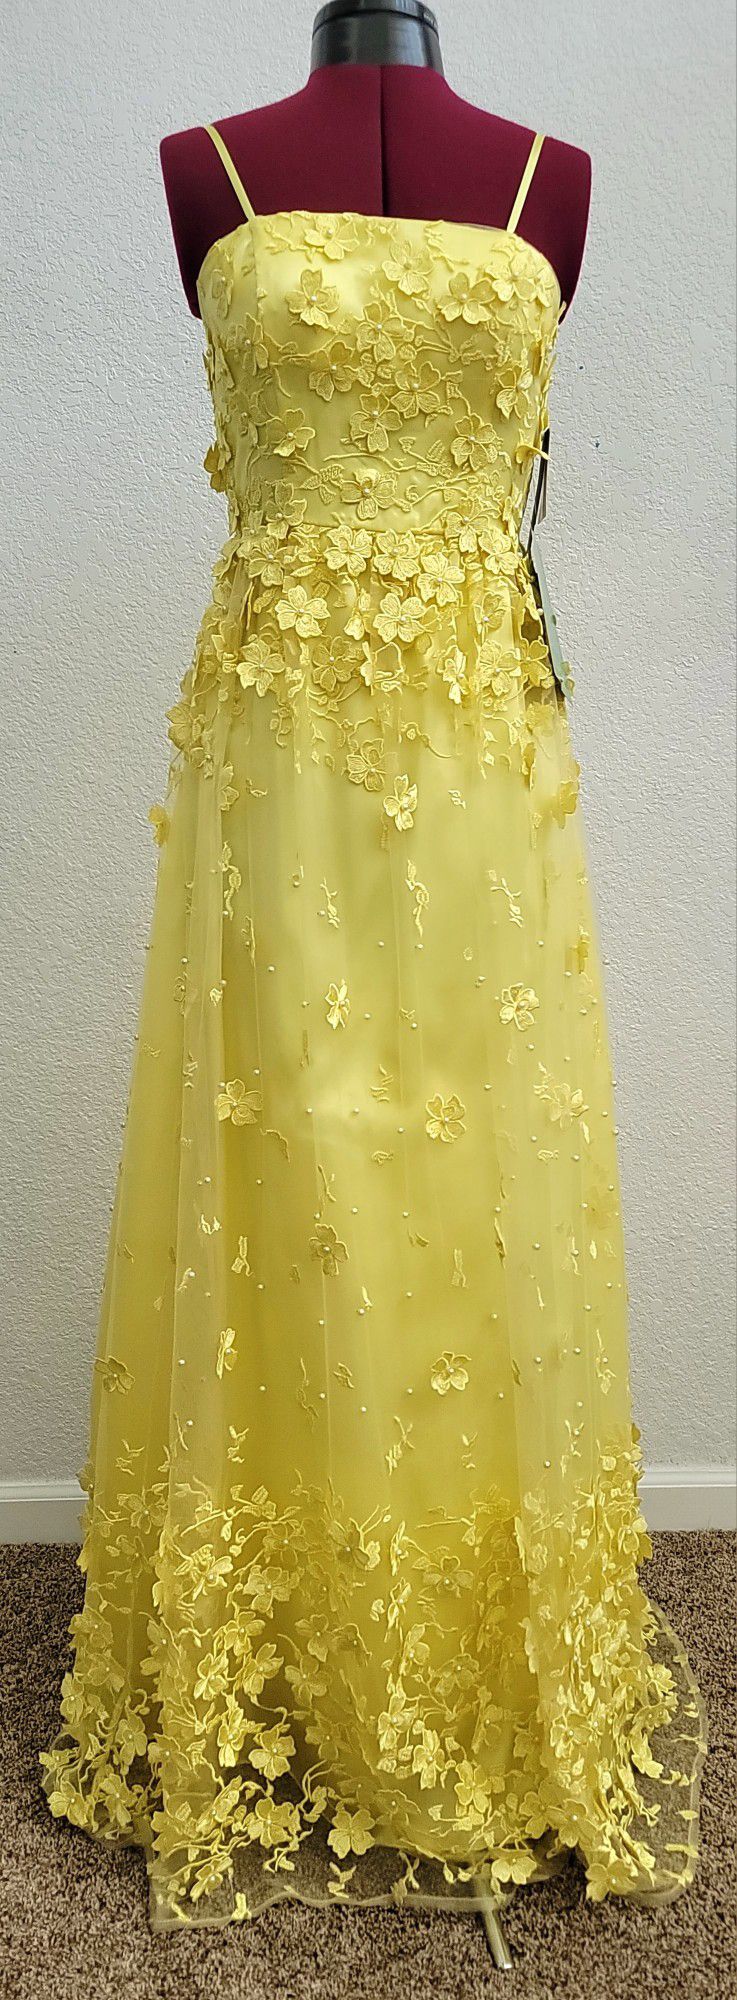 Formal Yellow Gown With Floral Appliques And Beads, Prom, Teen